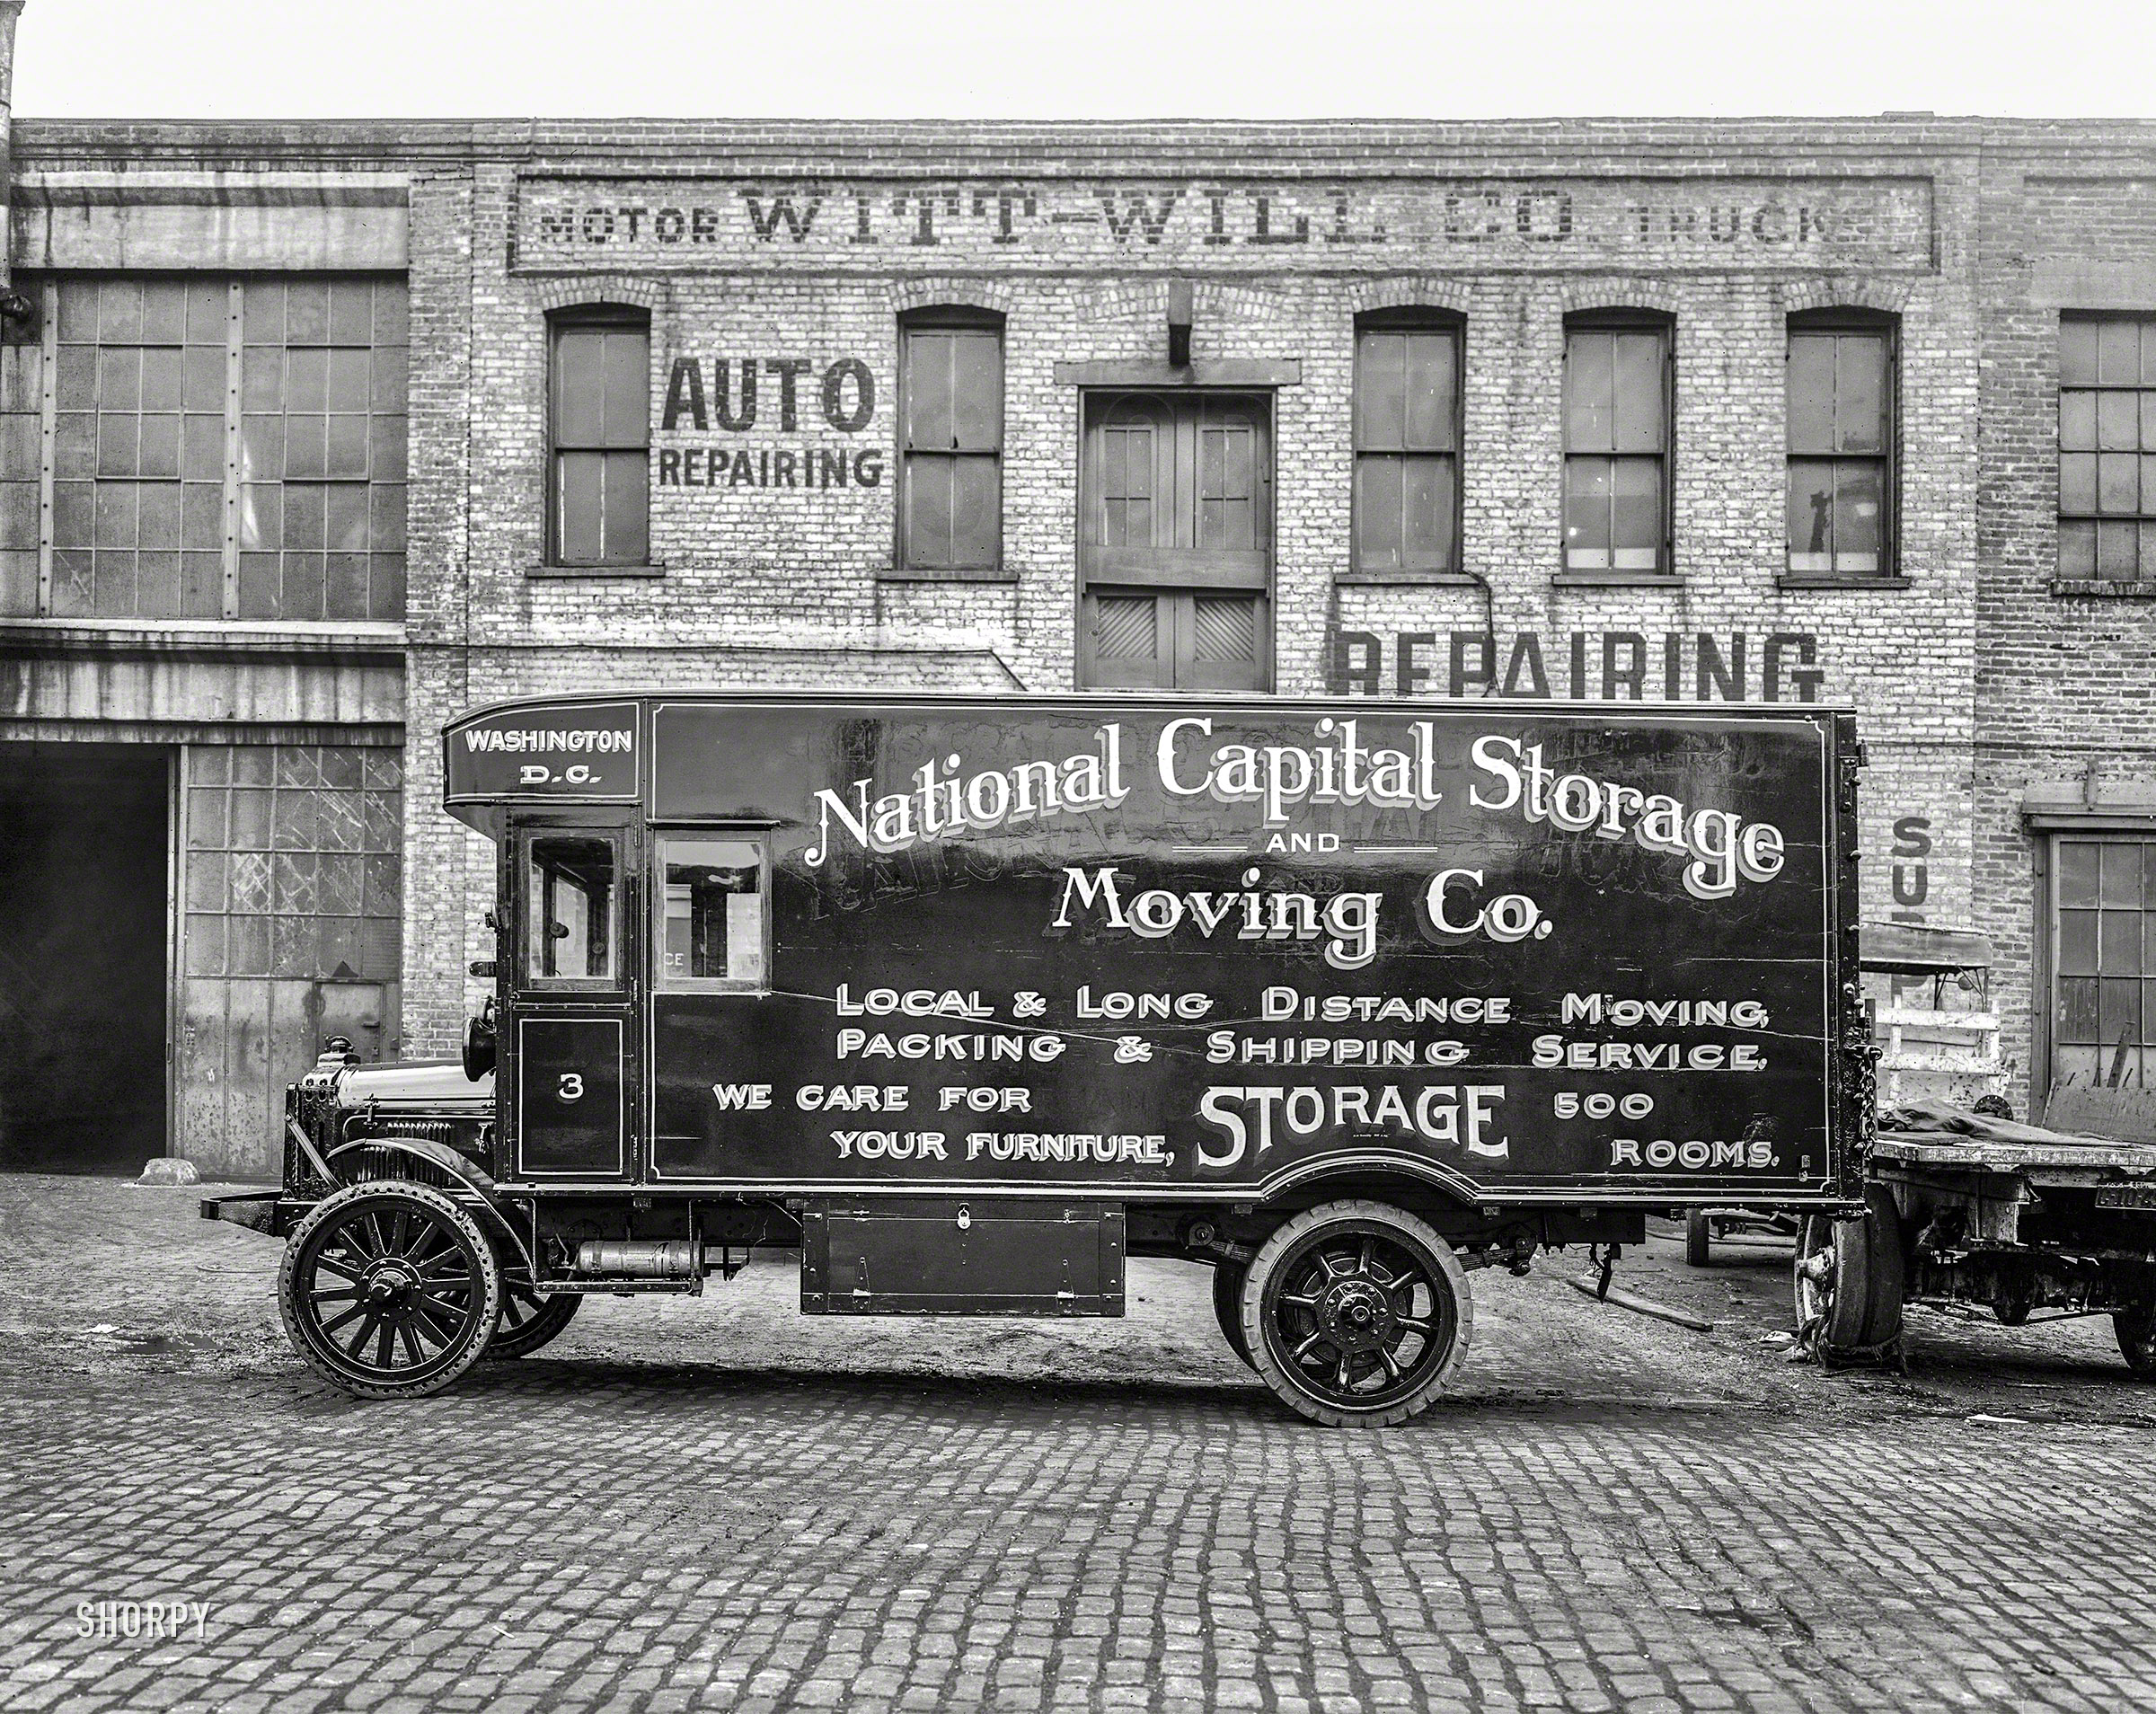 Washington, D.C., circa 1926. "National Capital Storage & Moving Co." At 52 N Street N.E., the Witt-Will motor truck garage last seen here. This older-generation van wears solid rubber tires, acetylene-gas headlamps and at least one repaint. 8x10 inch glass negative, National Photo Company. View full size.